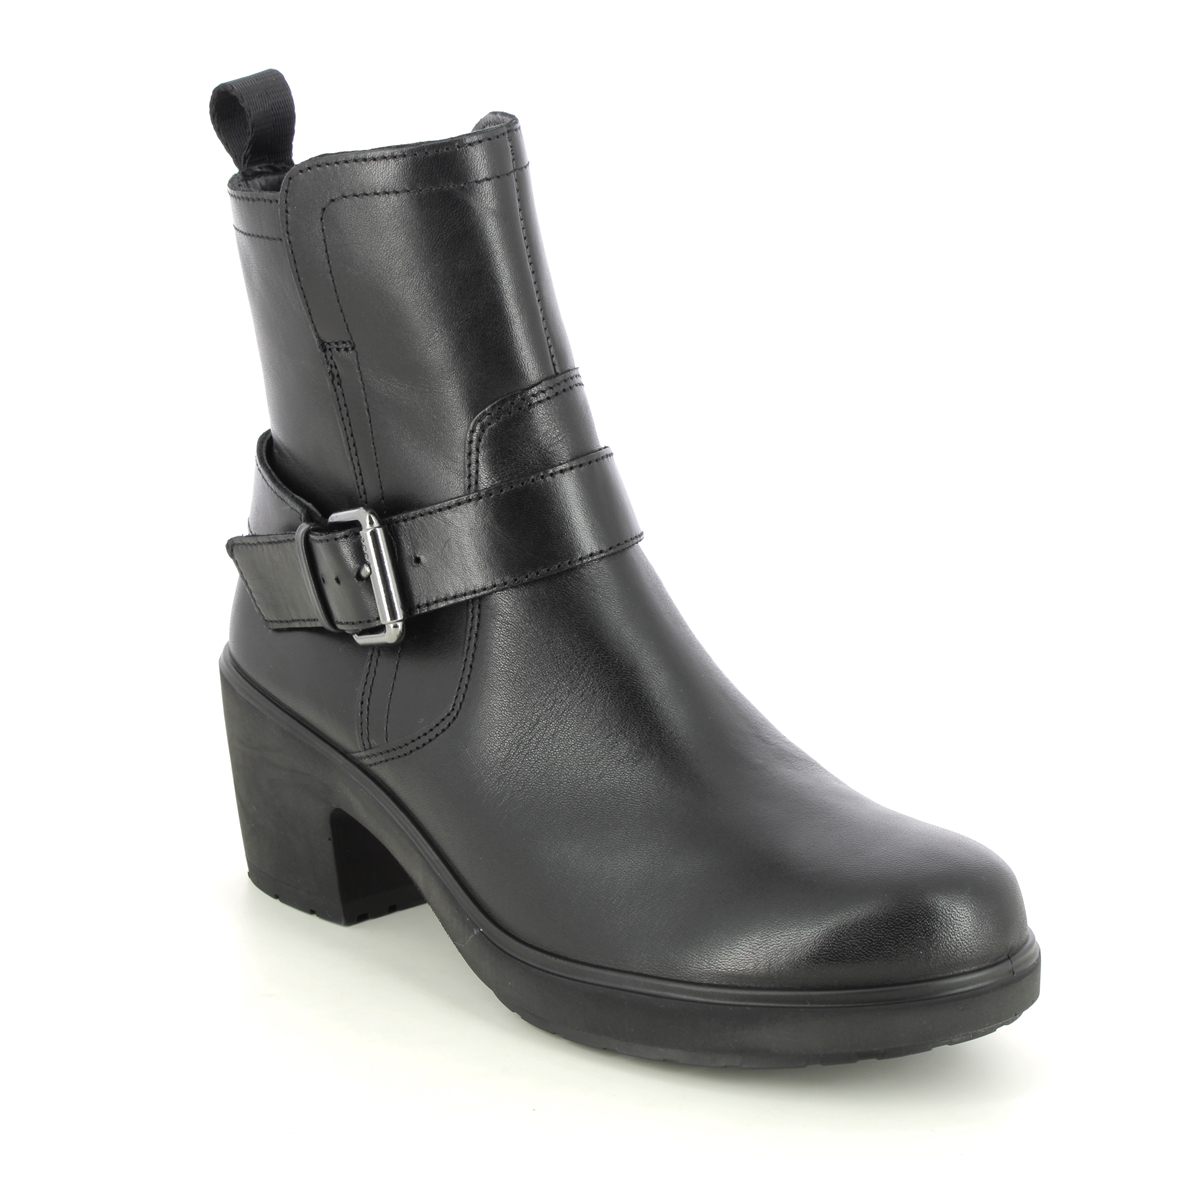 Ecco Zurich Tex Metropole Black Leather Womens Ankle Boots 222203-01001 In Size 37 In Plain Black Leather